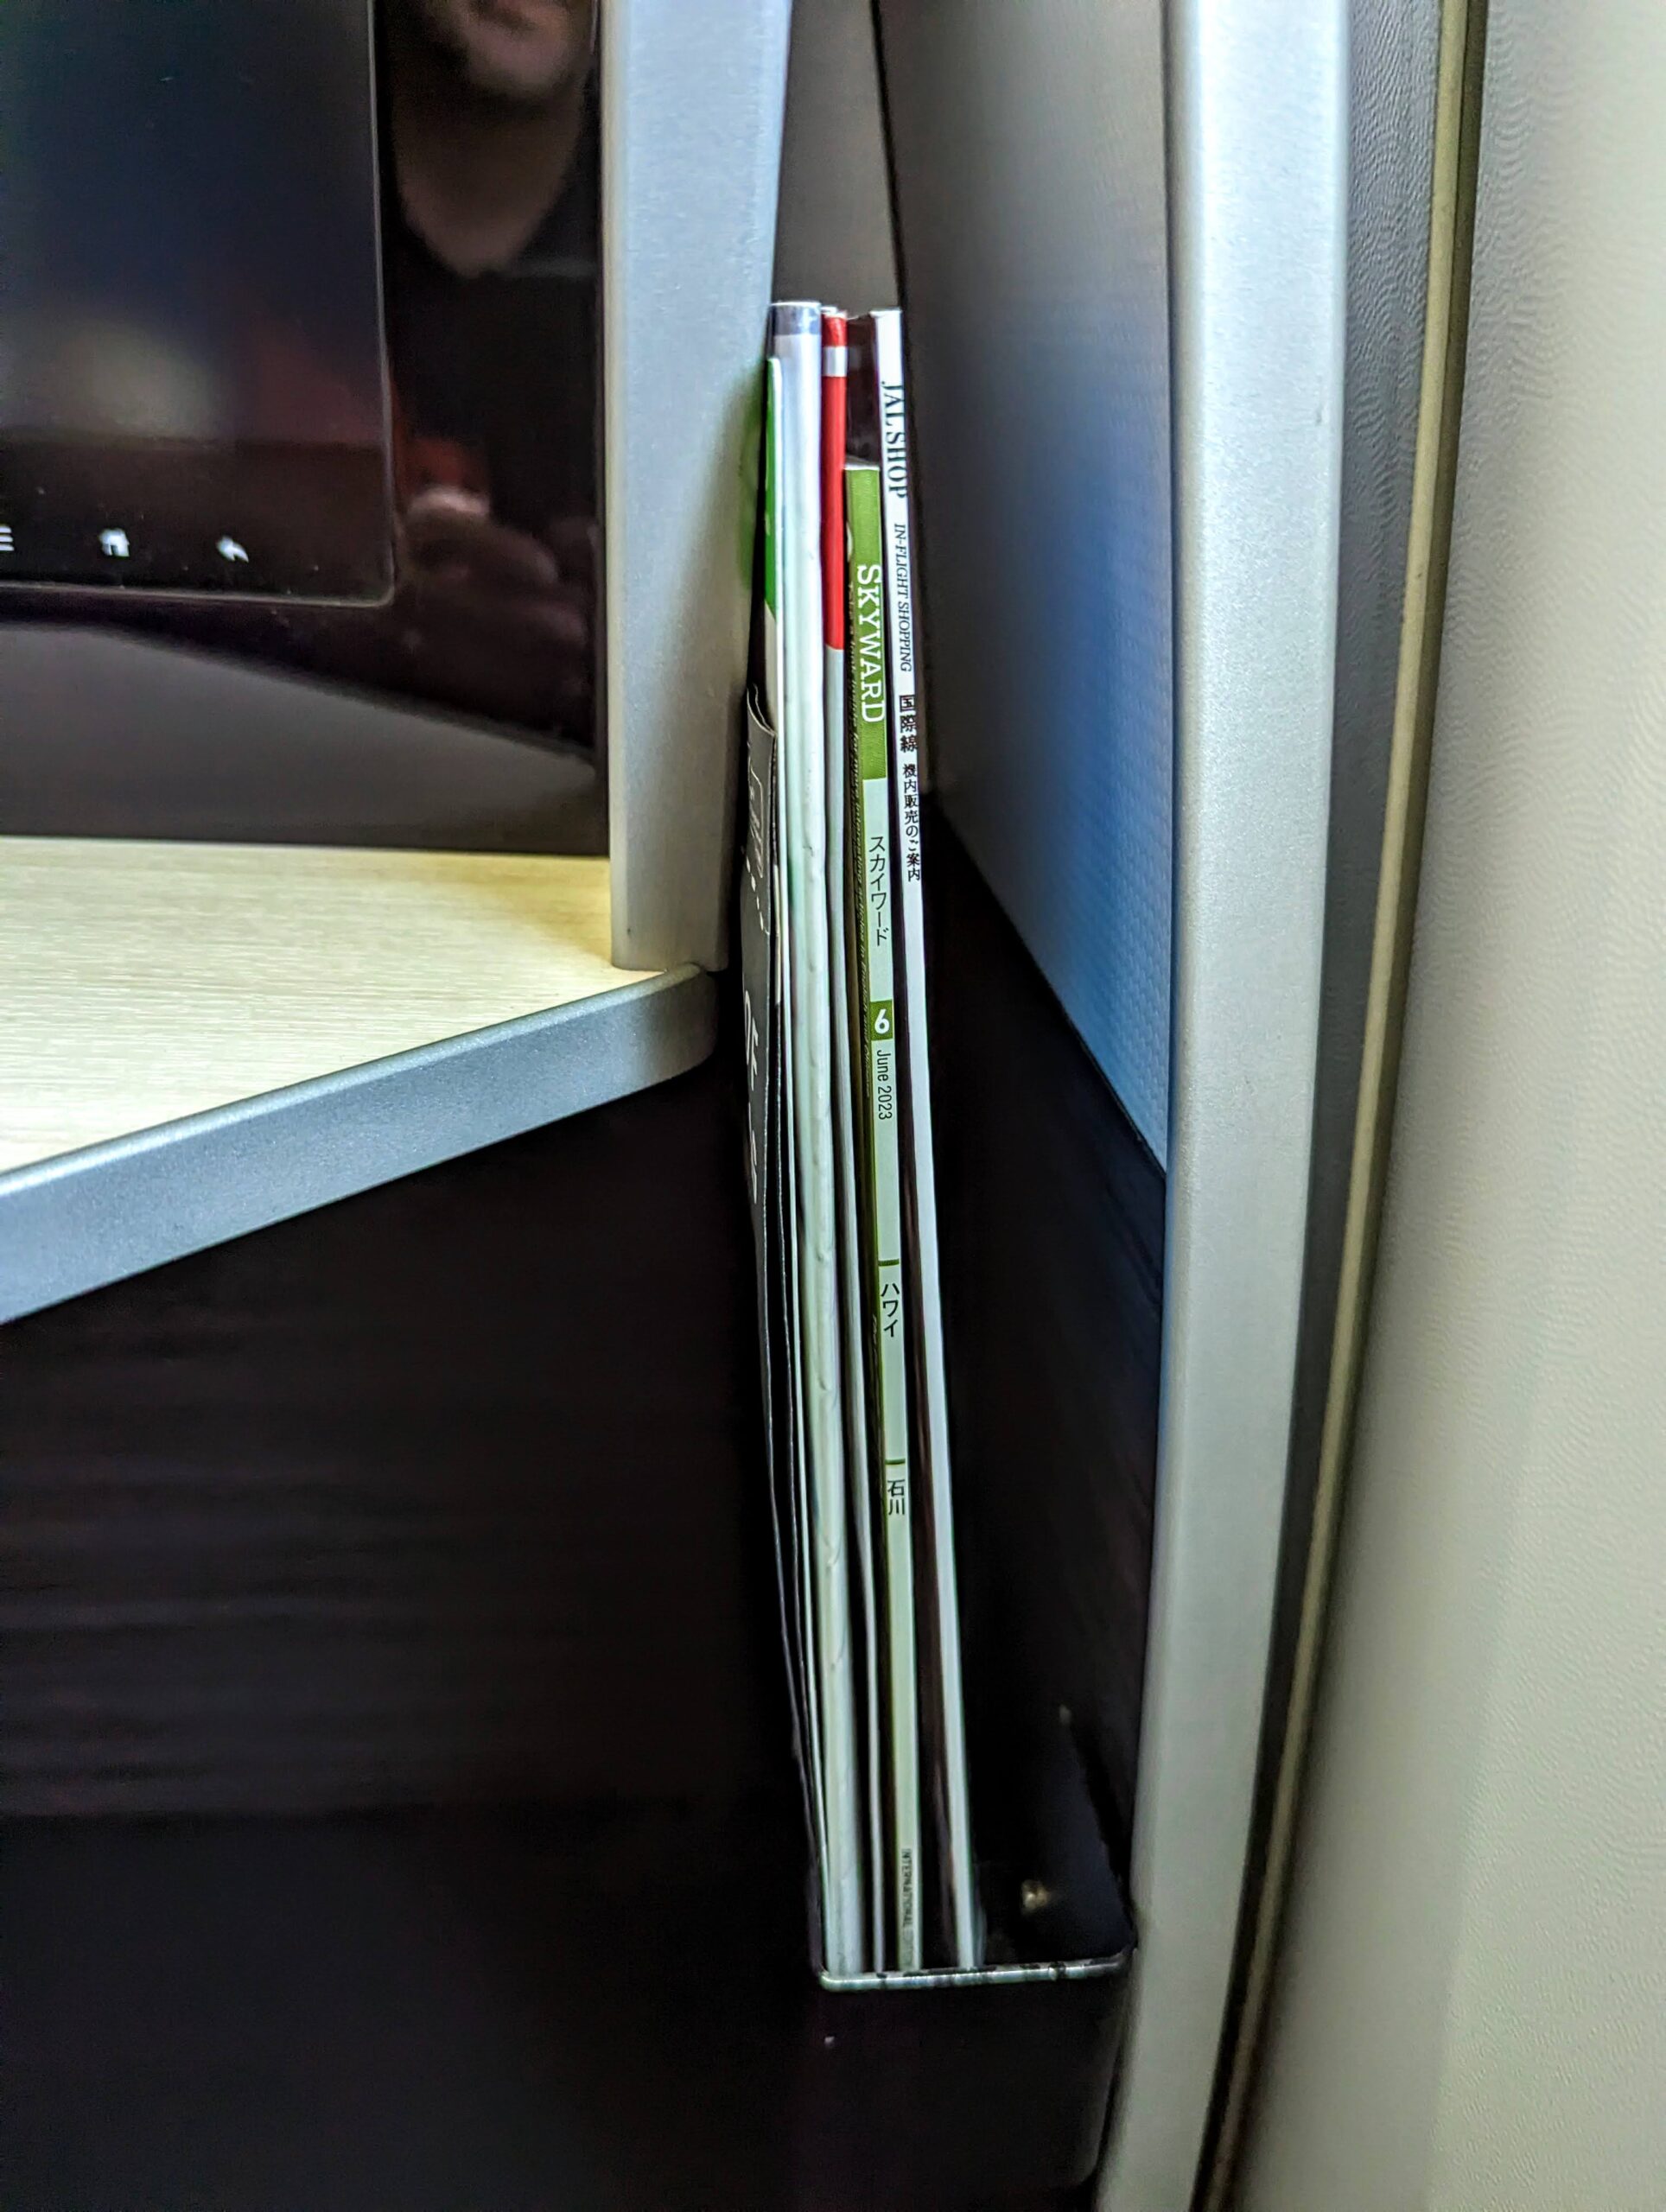 a stack of magazines on a shelf